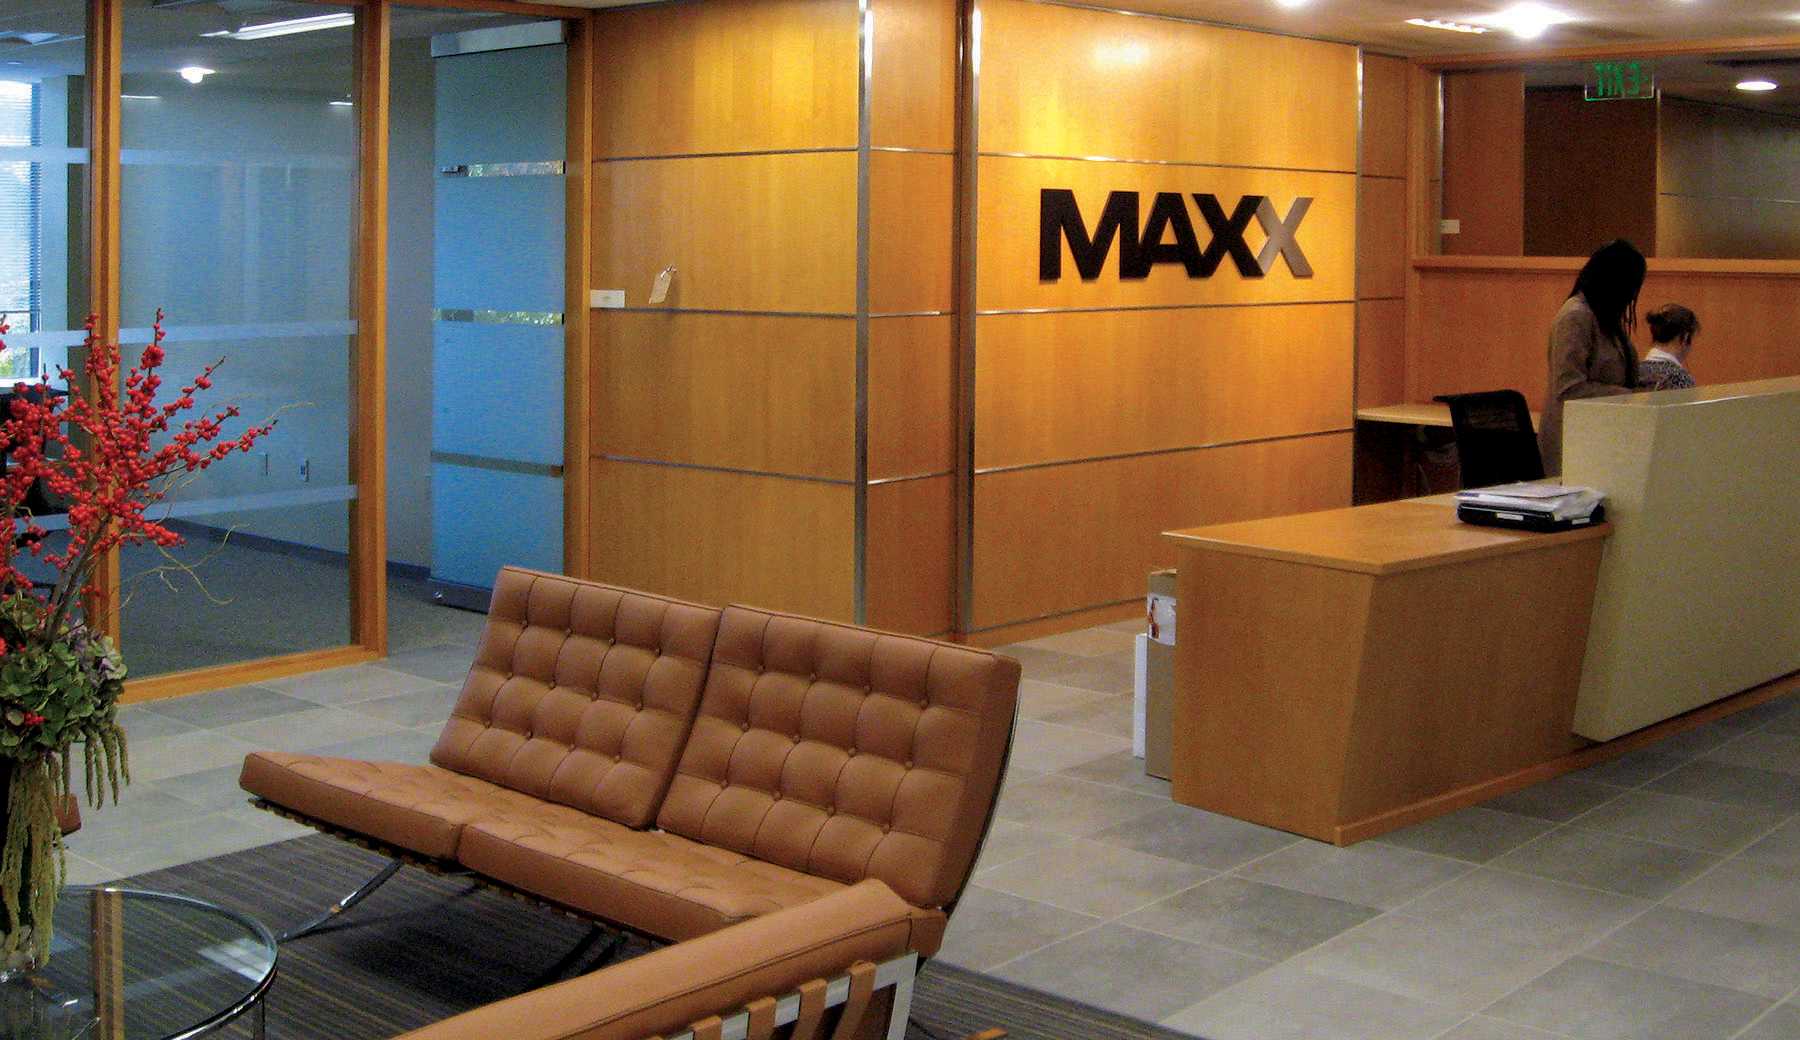 Maxx Properties is a national real estate management company that owns residential properties around the country.  Lothrop Associates provided design services for their 24,000 square foot headquarters located in Harrison, New York. Above is the reception and waiting area.